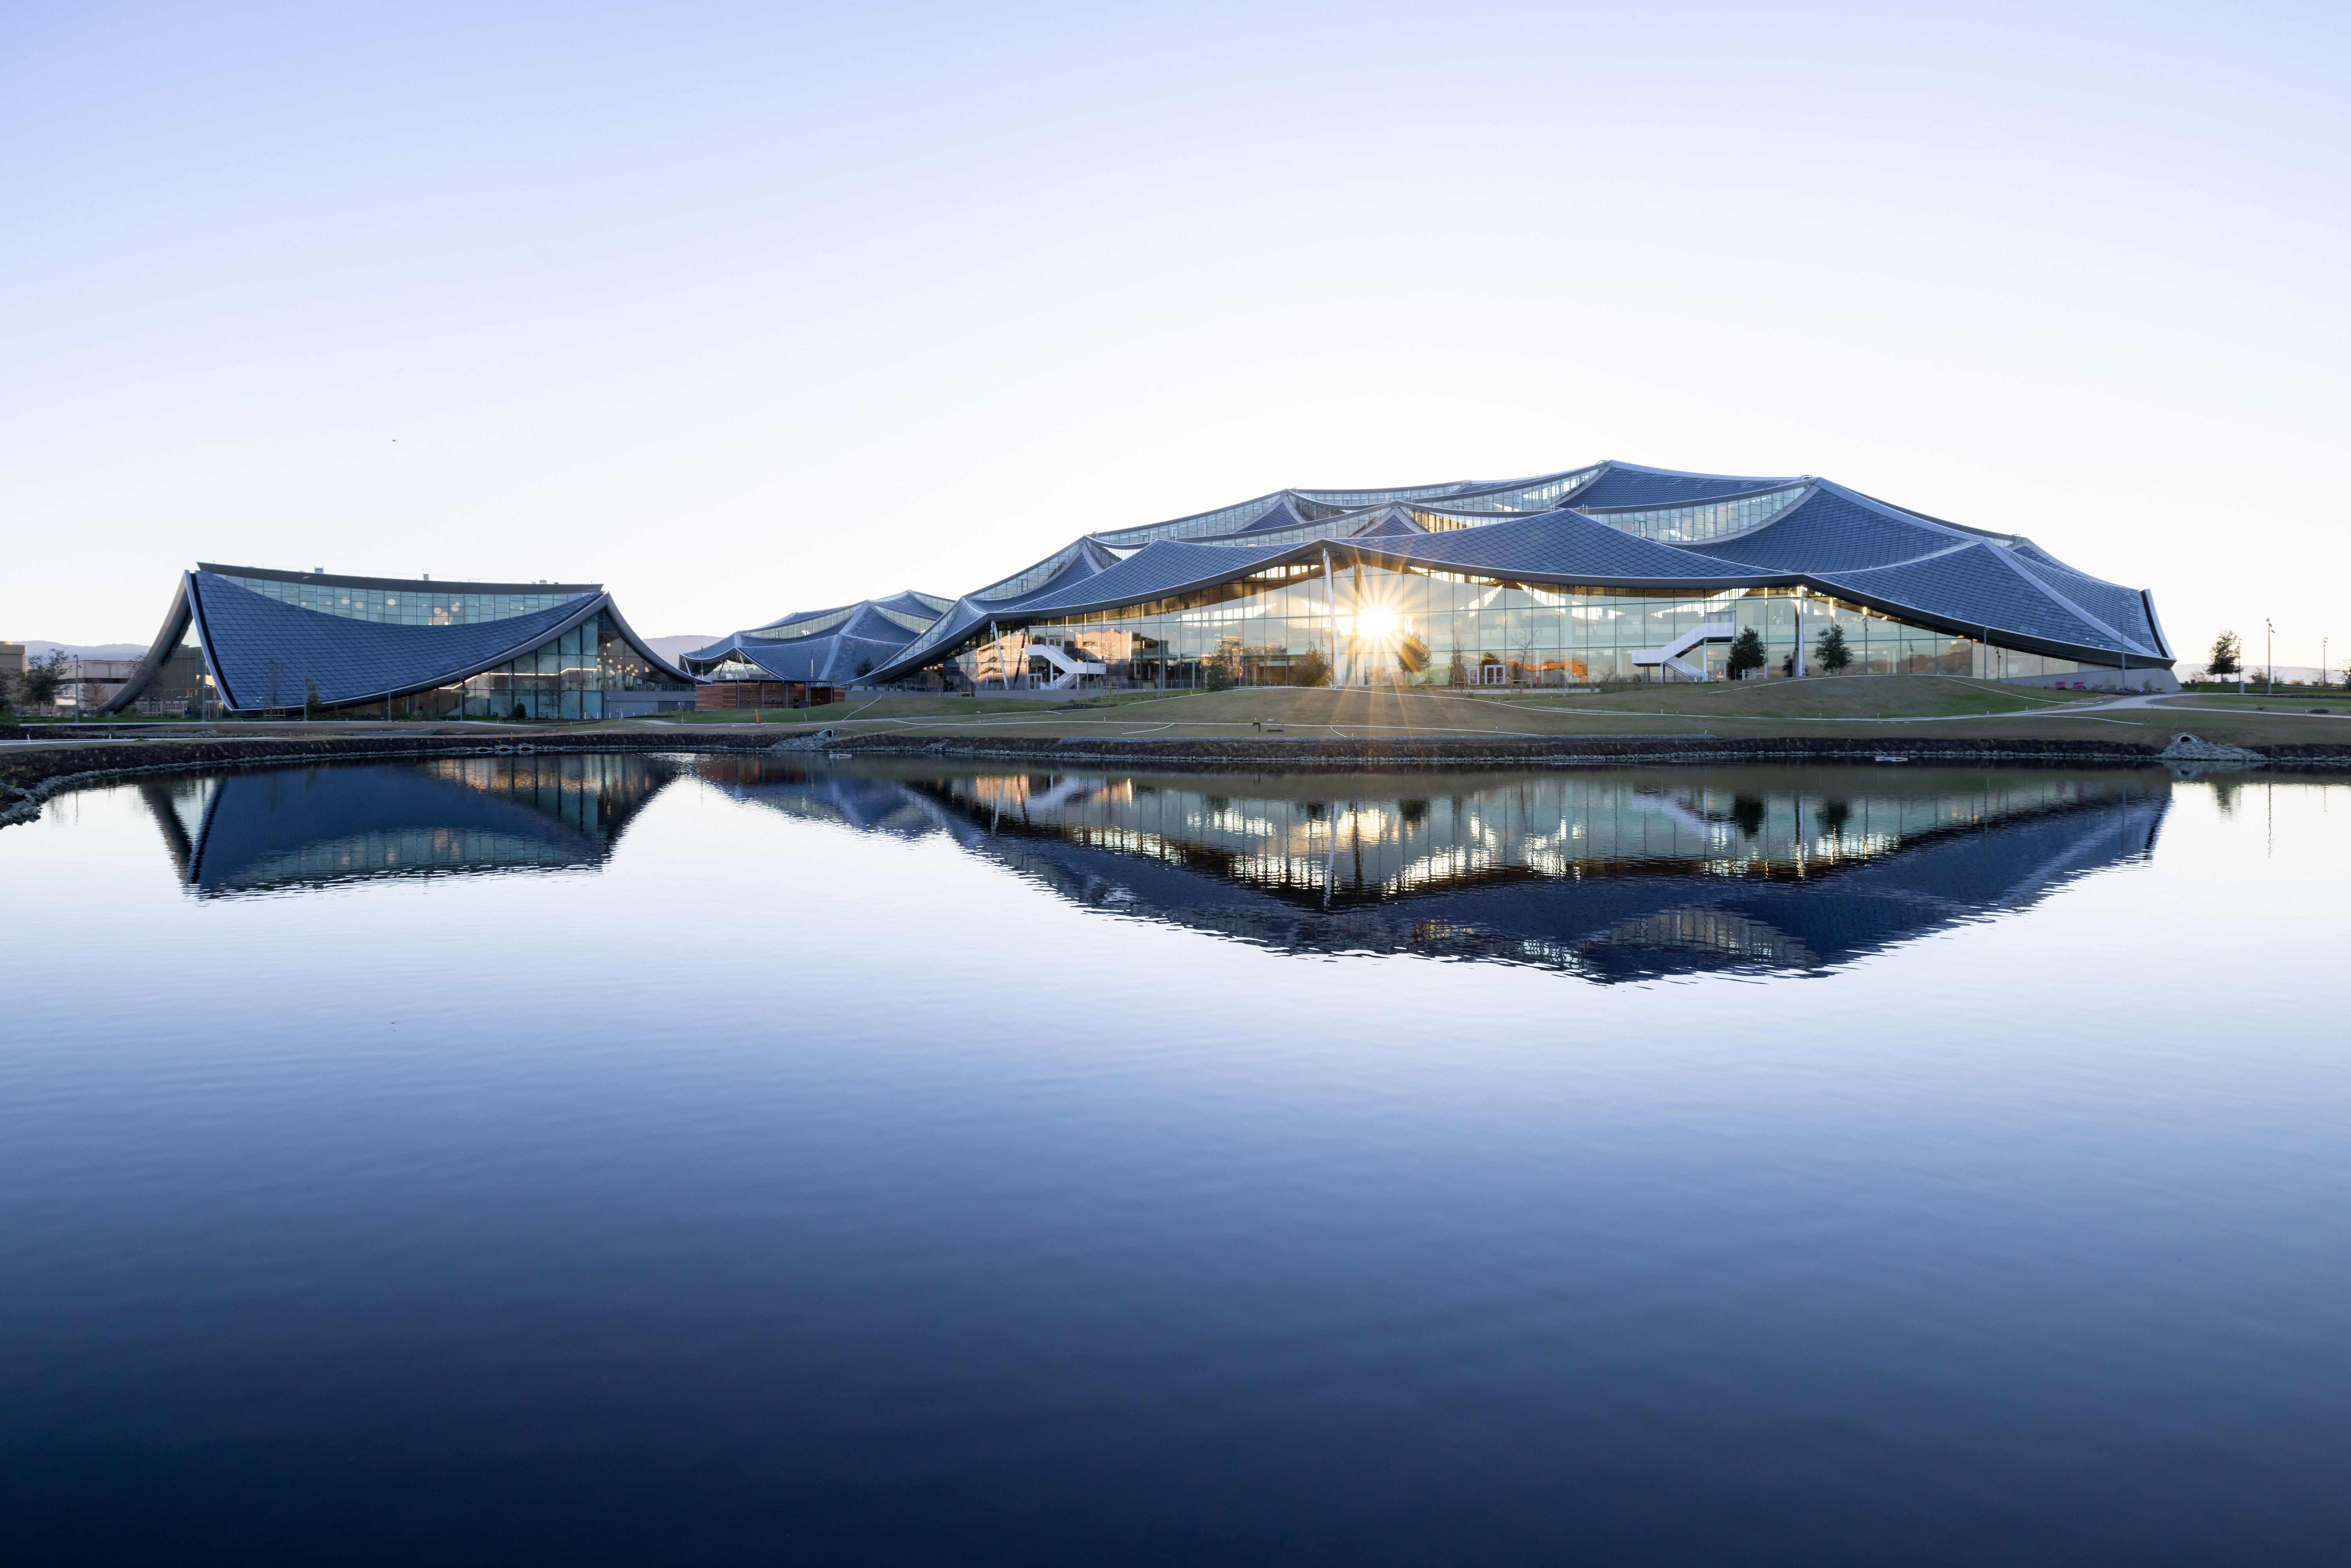 A “Dragonscale” Solar Roof Is the Sparkling Focus of Google’s Sustainable New Bay View Campus